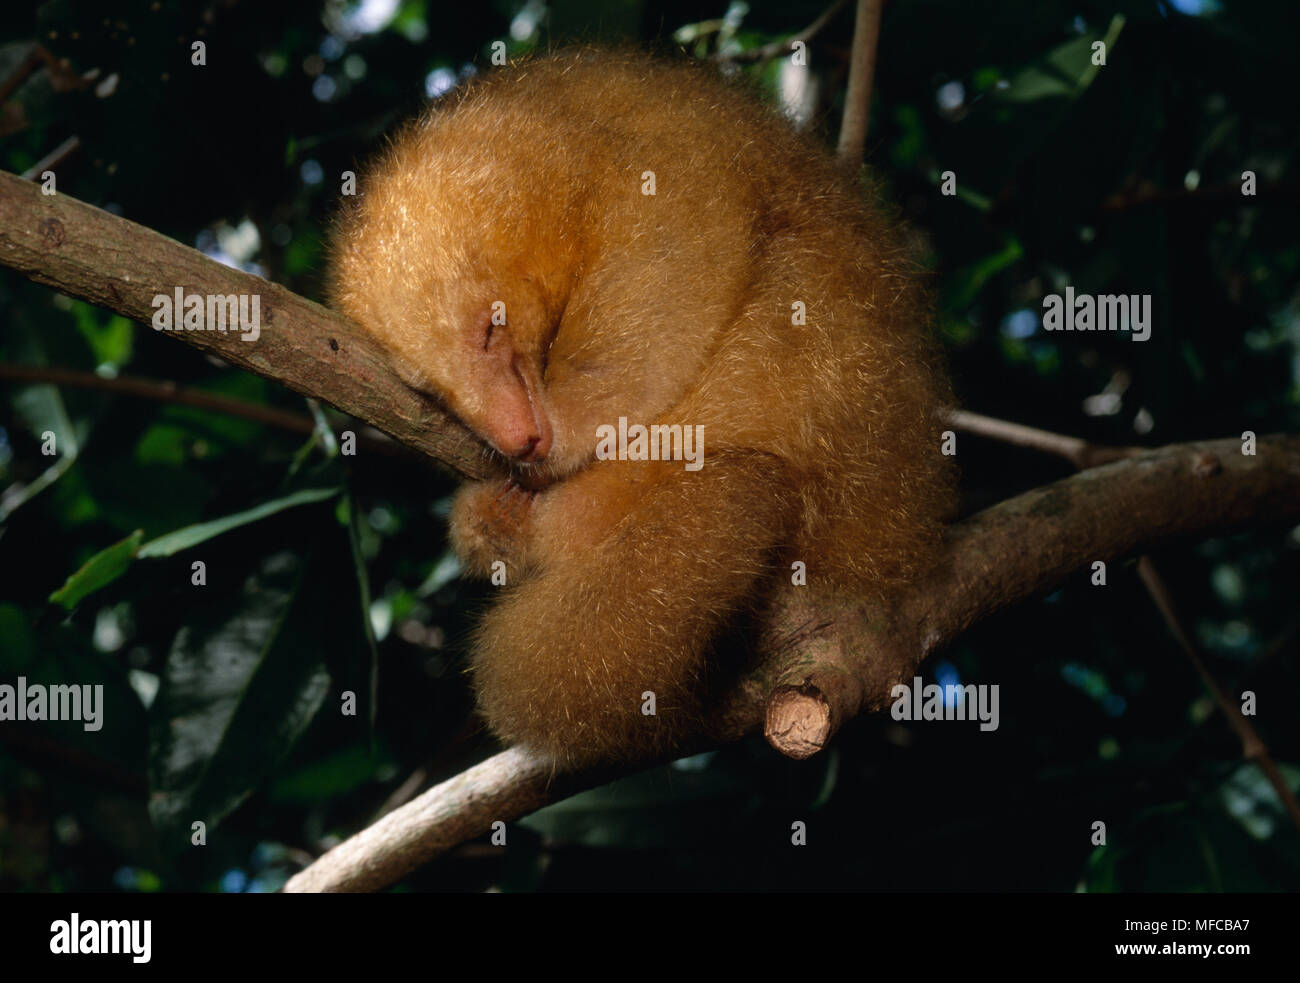 TWO-TOED or SILKY ANTEATER  Cyclopes didactylus sleeping on branch of tree  Caroni Swamp, Trinidad, West Indies Stock Photo